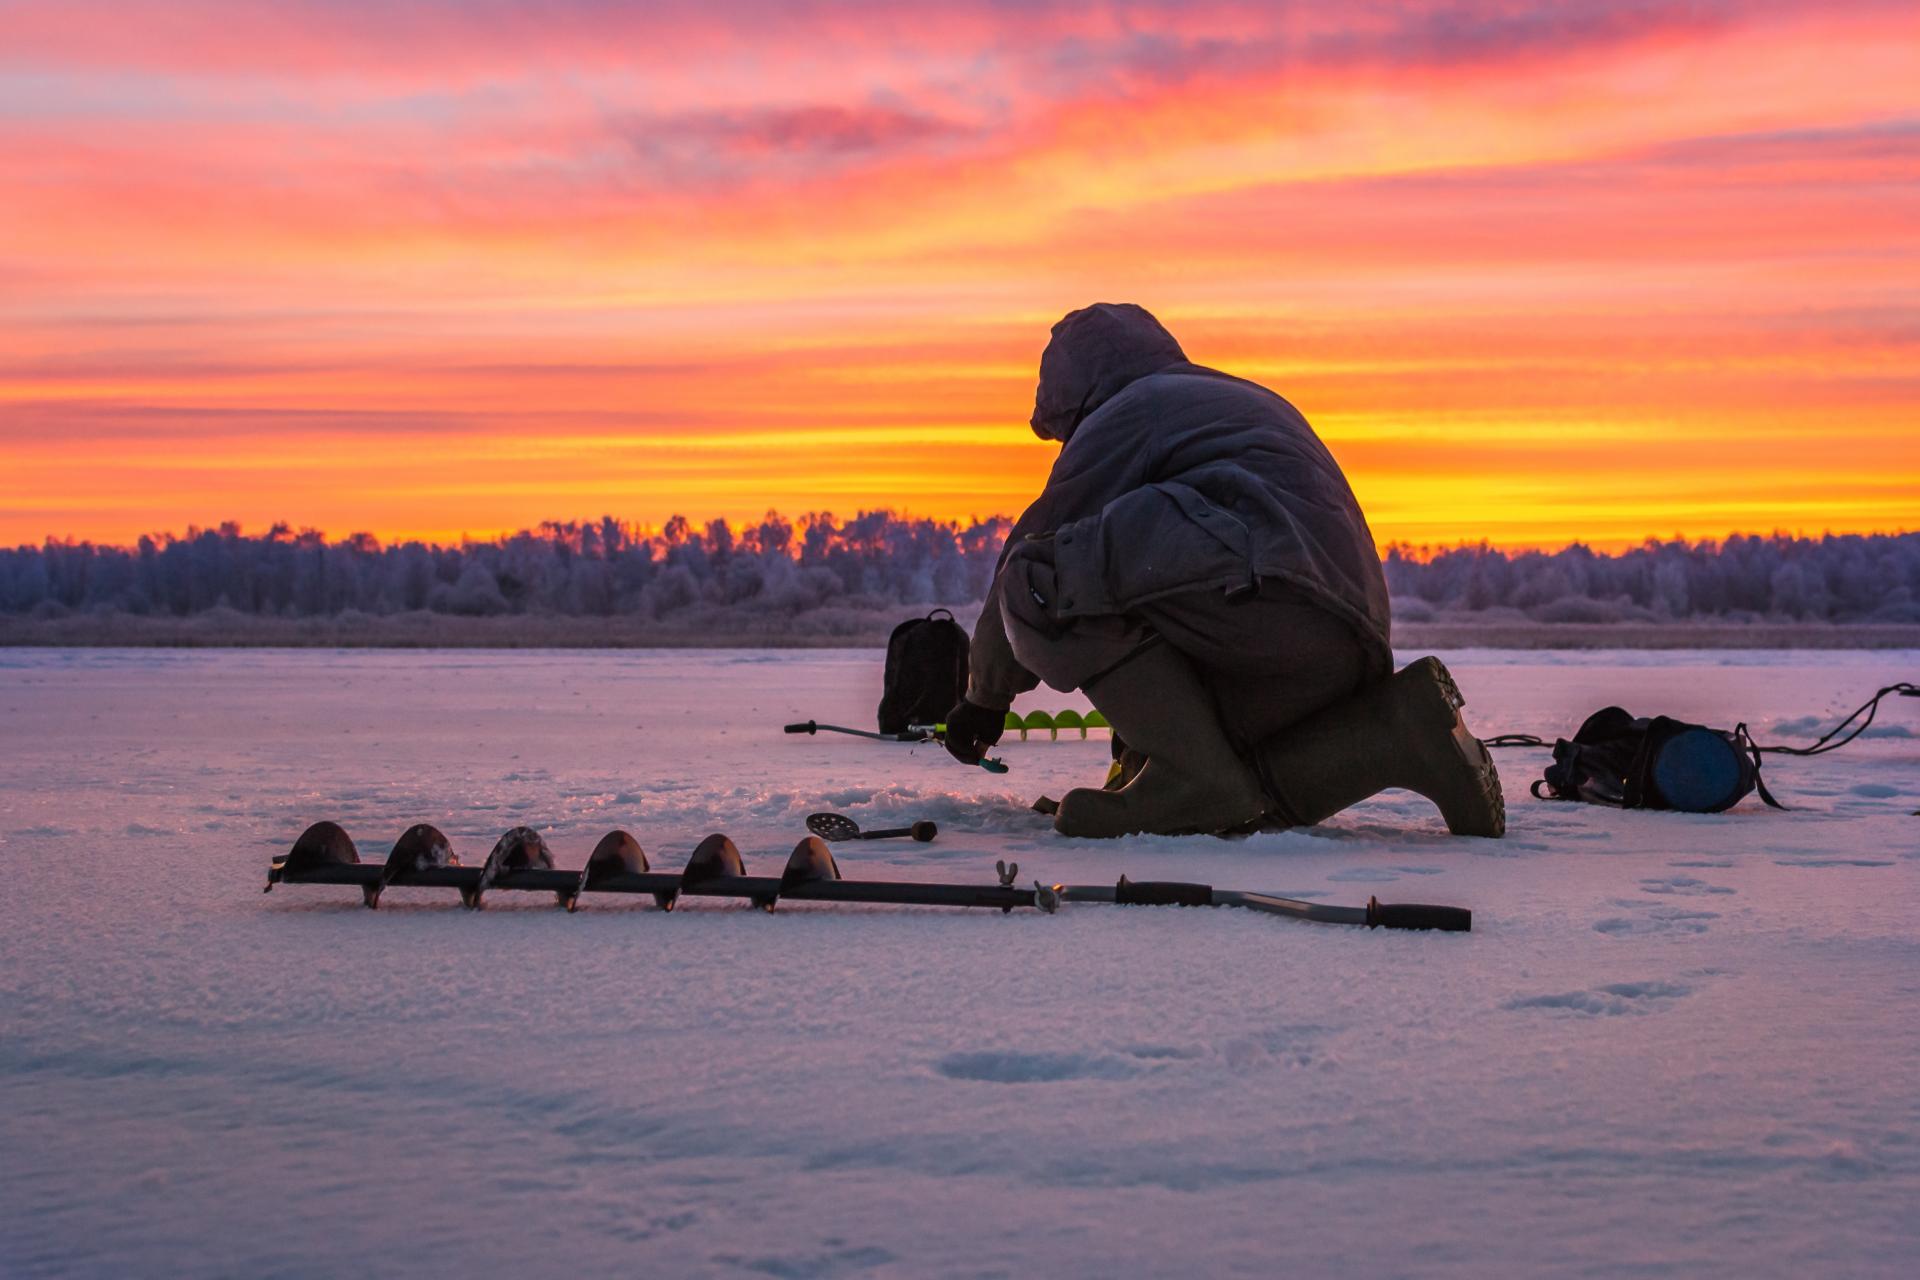 A man fishing outside on the ice in the winter during a sunset